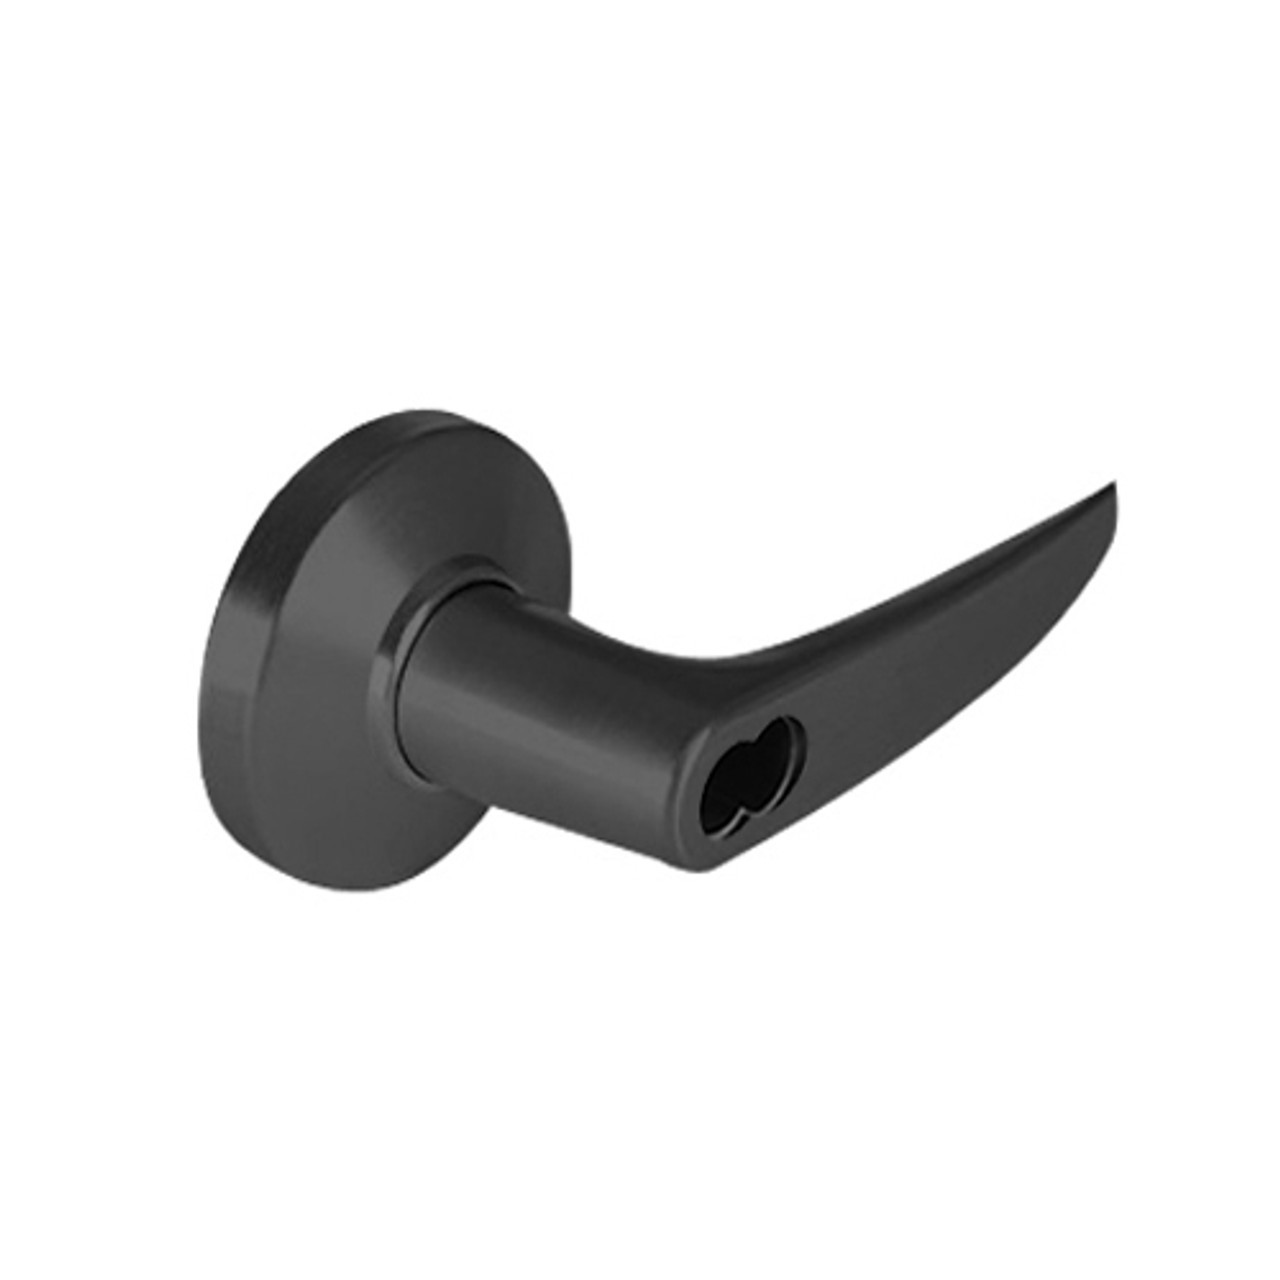 9K37A16CSTK622LM Best 9K Series Dormitory or Storeroom Cylindrical Lever Locks with Curved without Return Lever Design Accept 7 Pin Best Core in Black